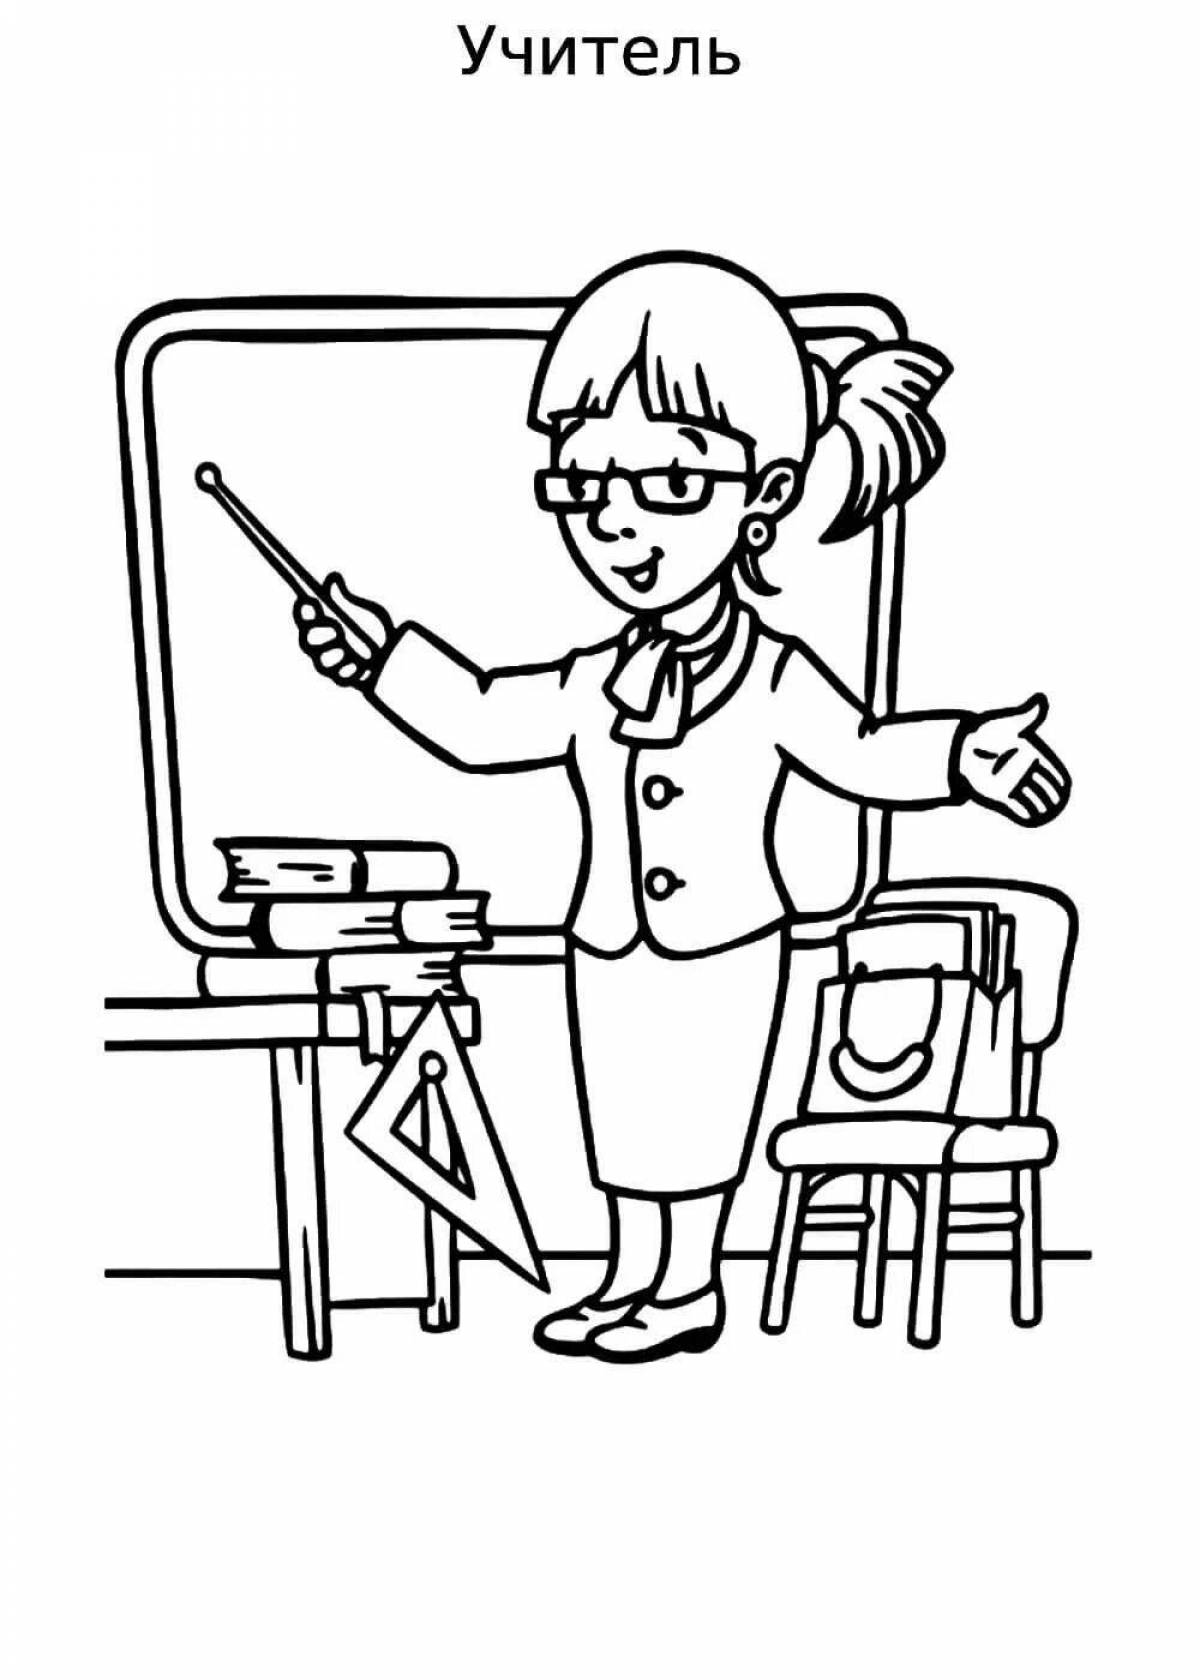 Coloring page energetic teacher